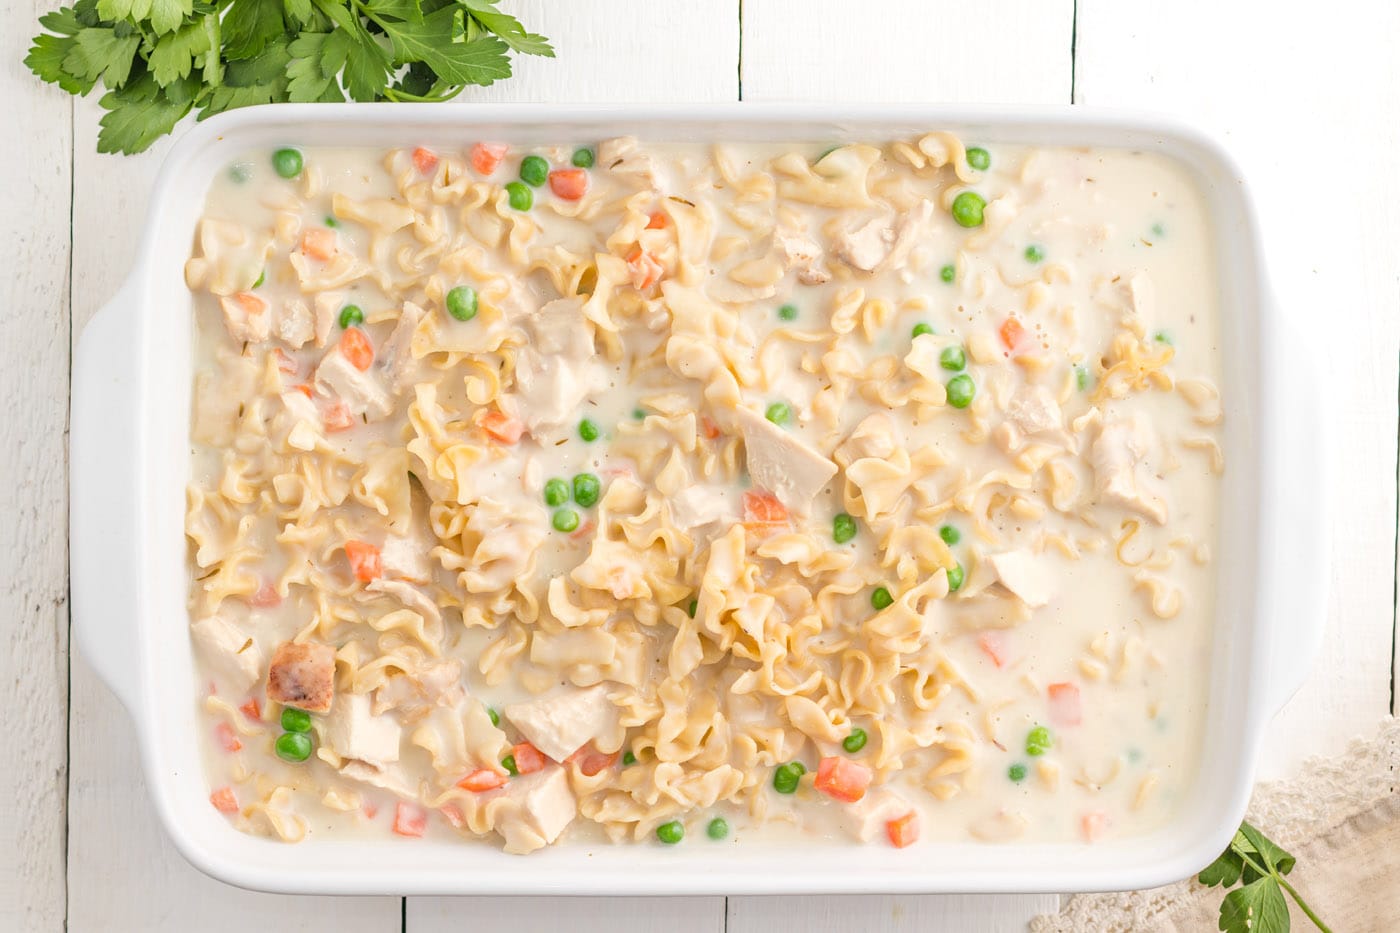 chicken noodle casserole in a baking dish